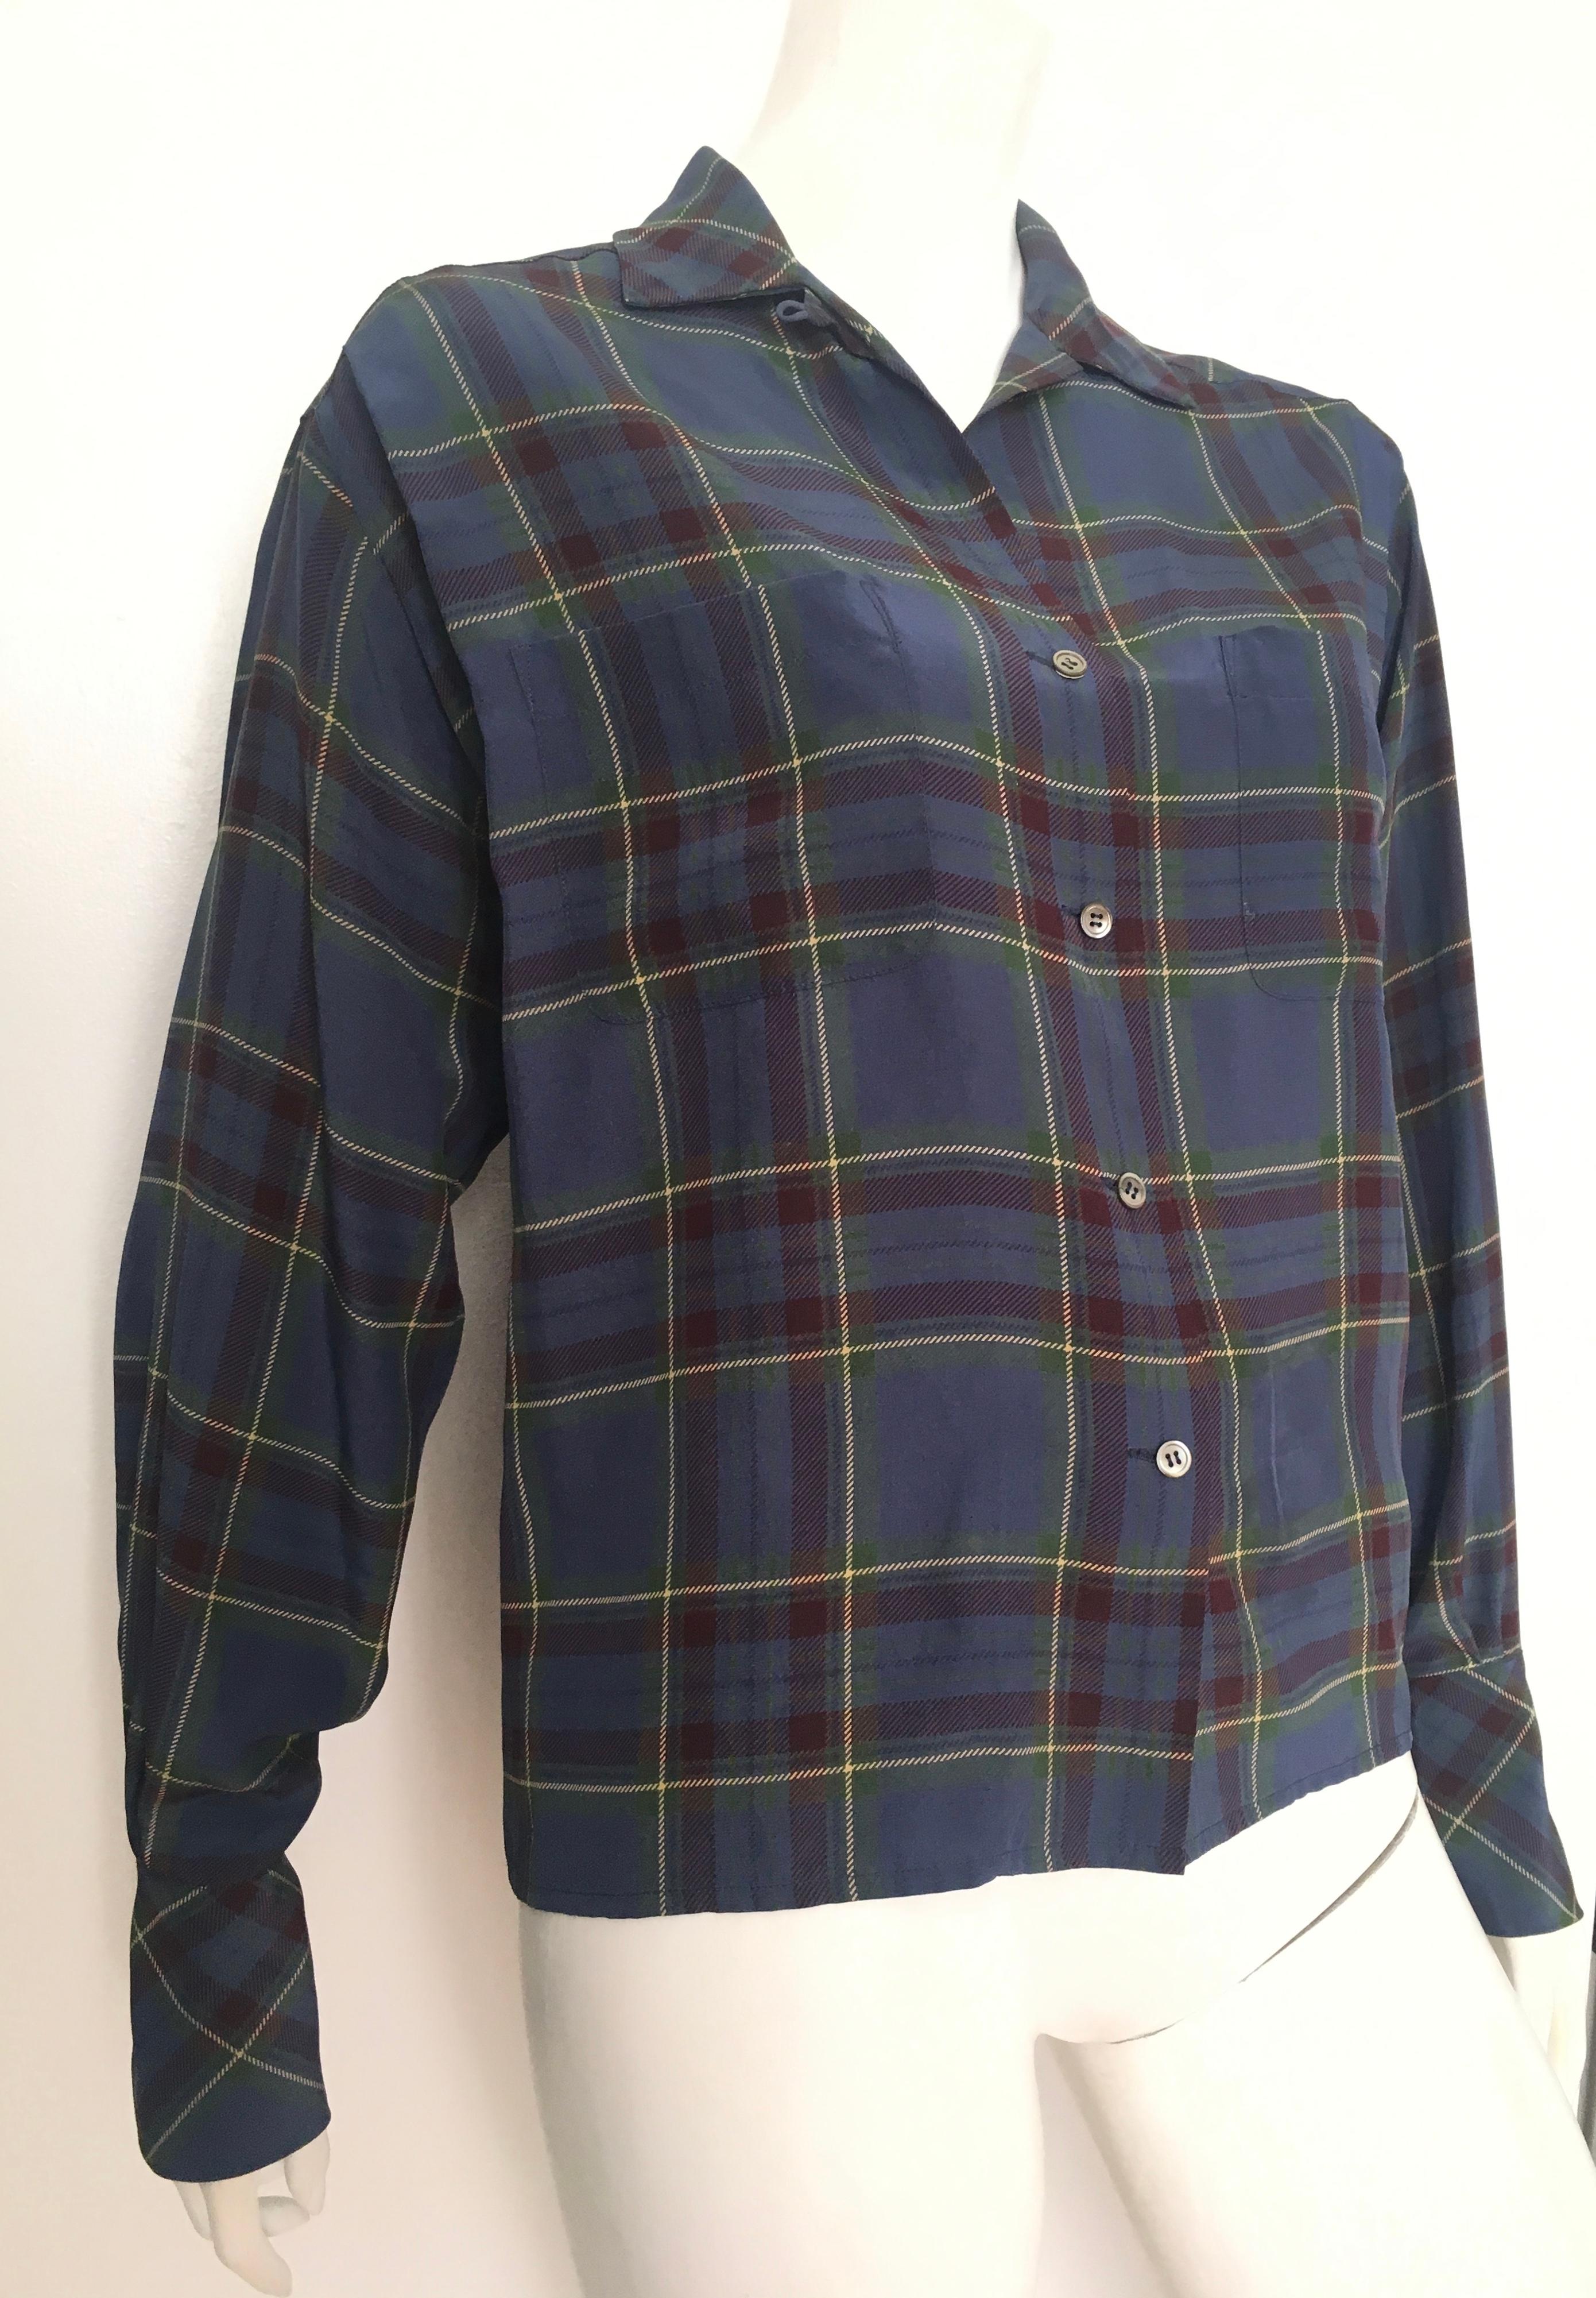 Calvin Klein 1980s silk plaid long sleeve blouse is a size 6.  This blouse was designed when Calvin Klein was at the helm of his fashion brand. Gorgeous cuffs that can be worn folded up or worn folded down. Ladies here is your opportunity to own a